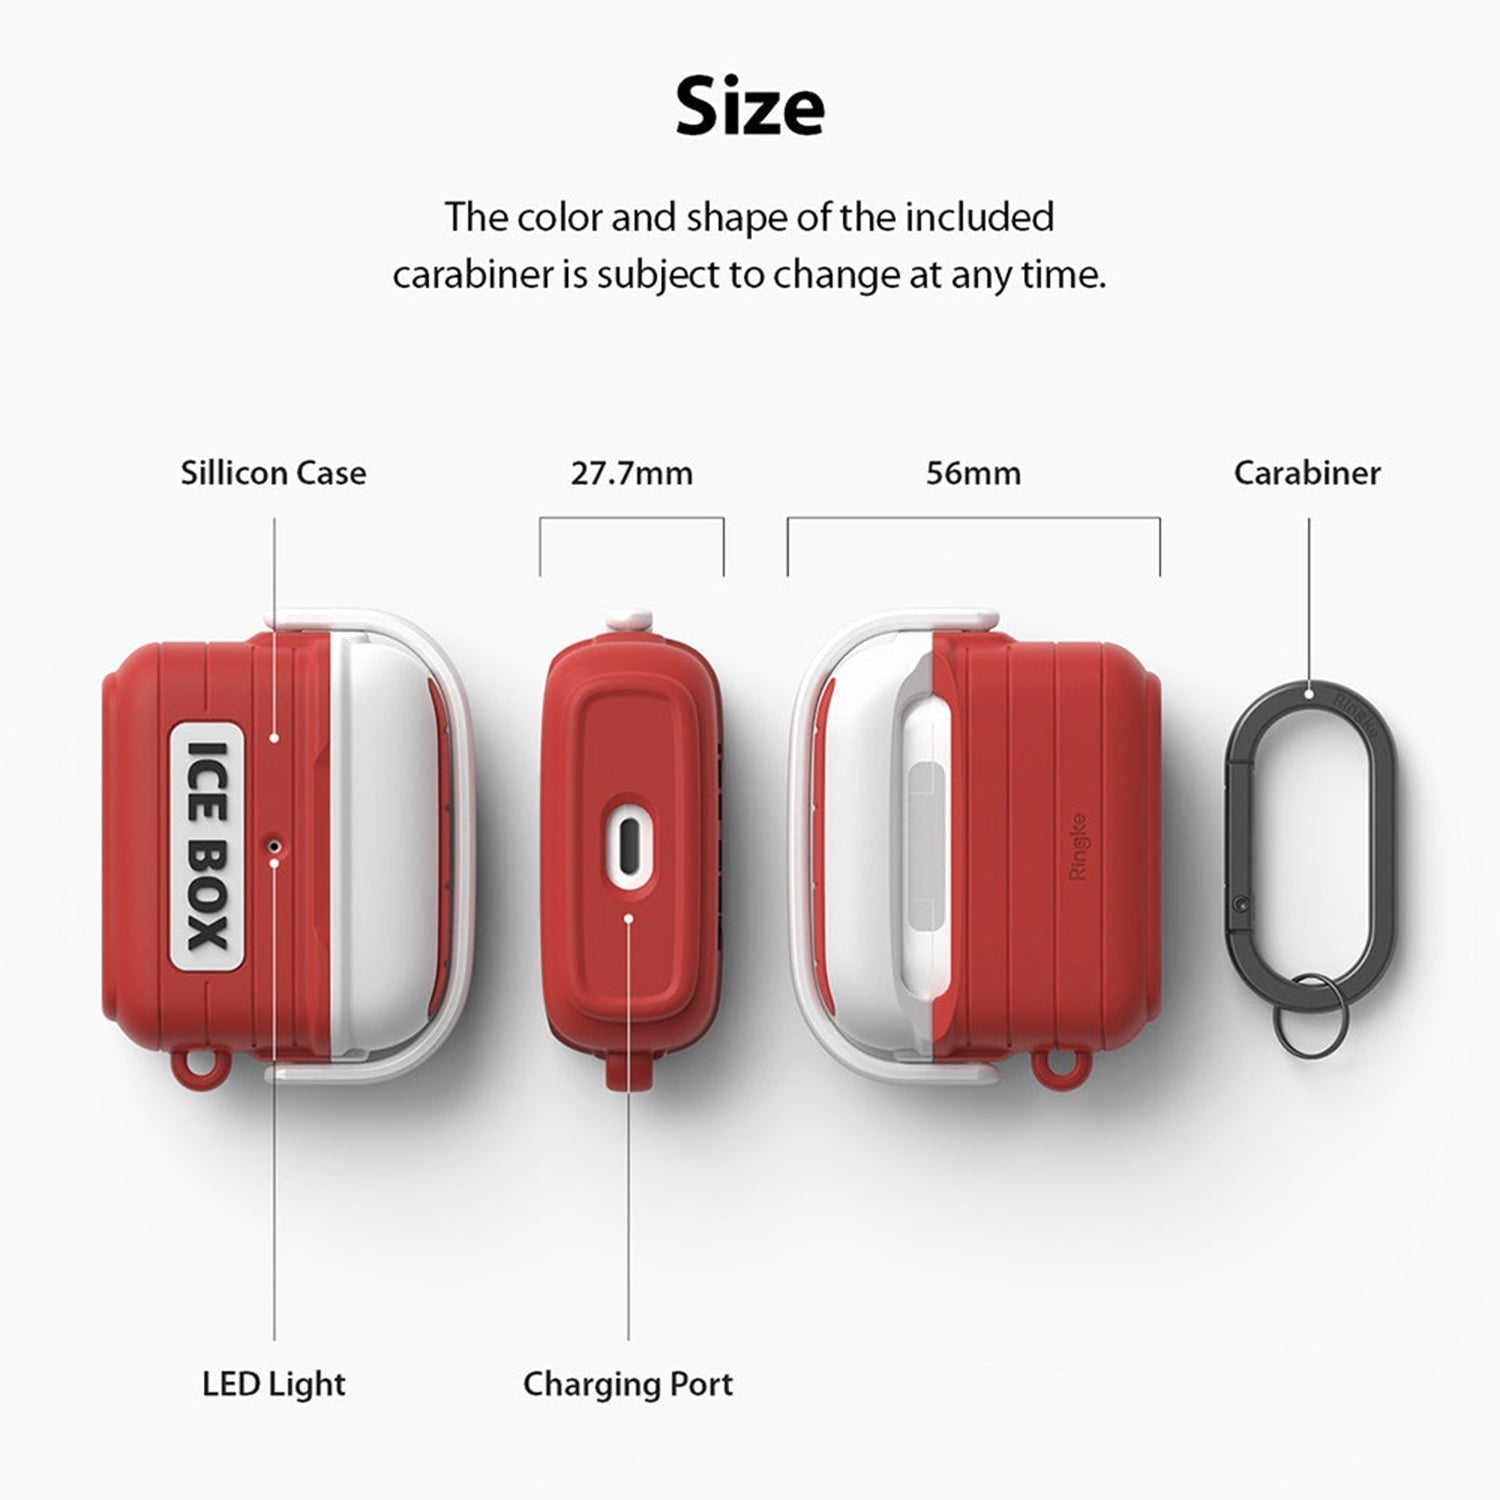 Shop and buy Ringke Ice Box Silicon Case for AirPods 3 (2021) with Carabiner Lock-in function shock-resistant| Casefactorie® online with great deals and sales prices with fast and safe shipping. Casefactorie is the largest Singapore official authorised retailer for the largest collection of mobile premium accessories.